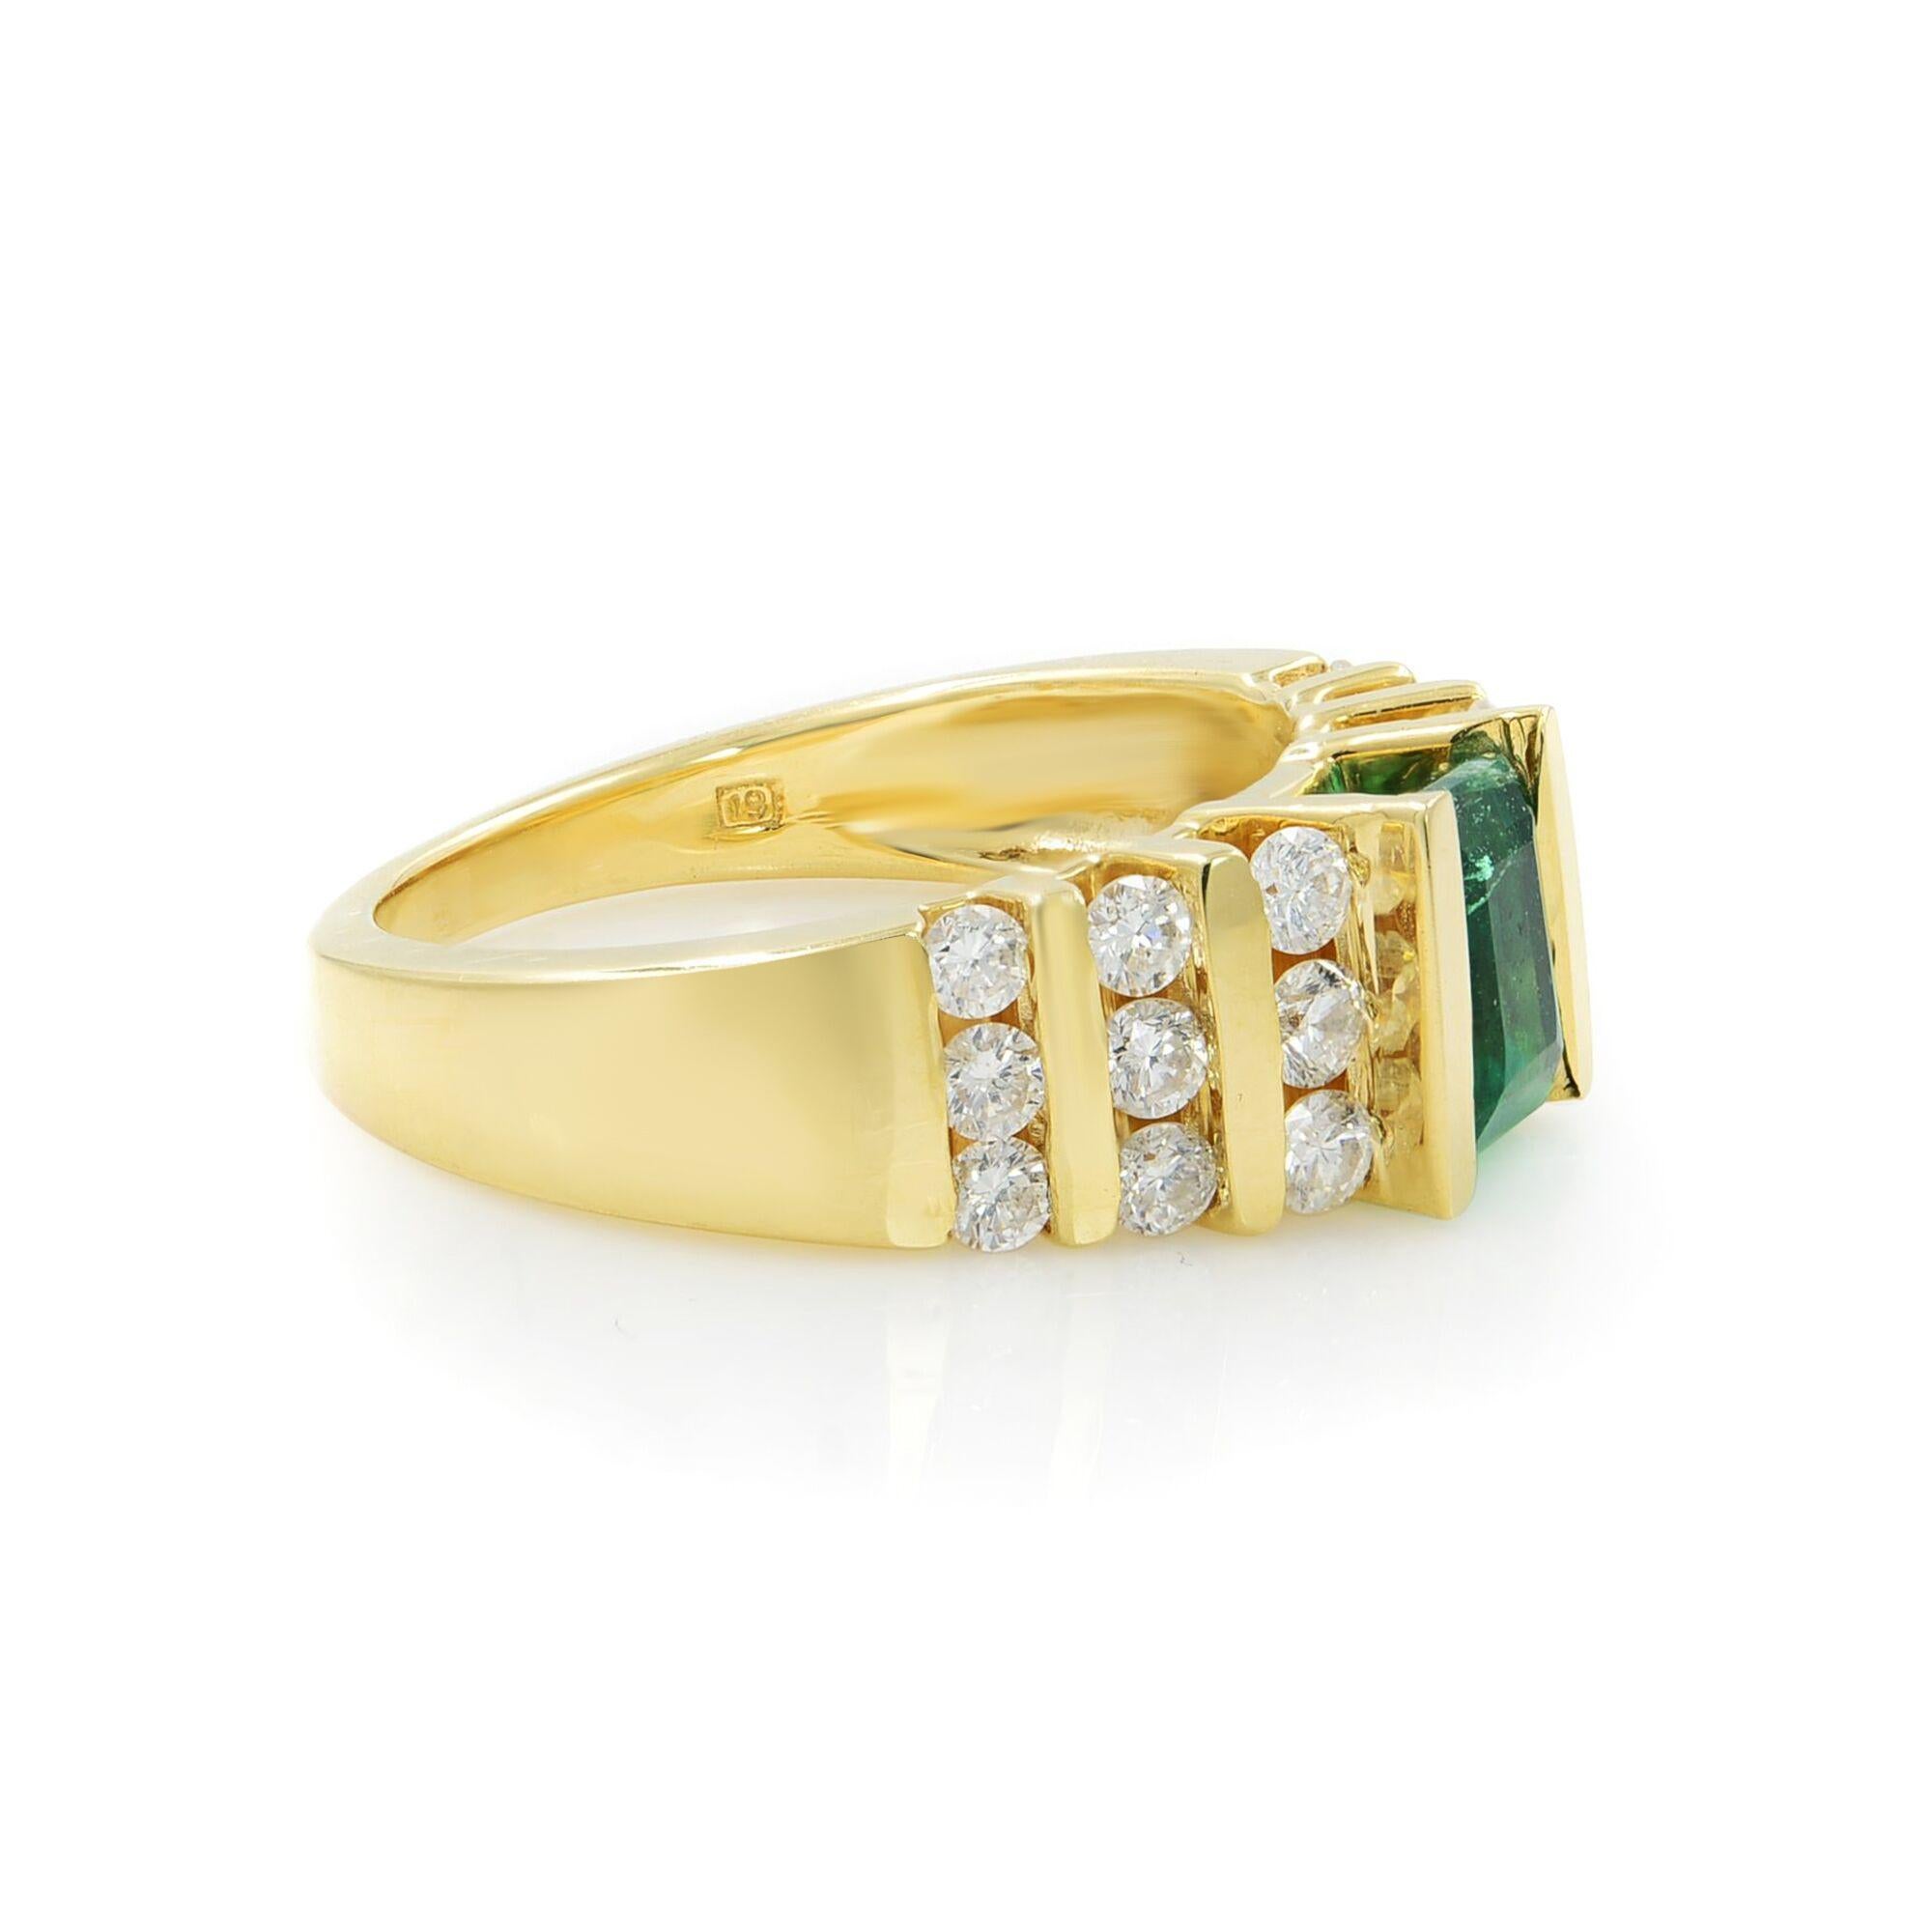 This is a beautiful ring from our Rachel Koen collection. The ring is crafted in 18K yellow gold, it features a green emerald weighing 1.00cttw as a center stone. In addition, sparkly diamonds on both sides in a total of 1.00 carat weight. A perfect